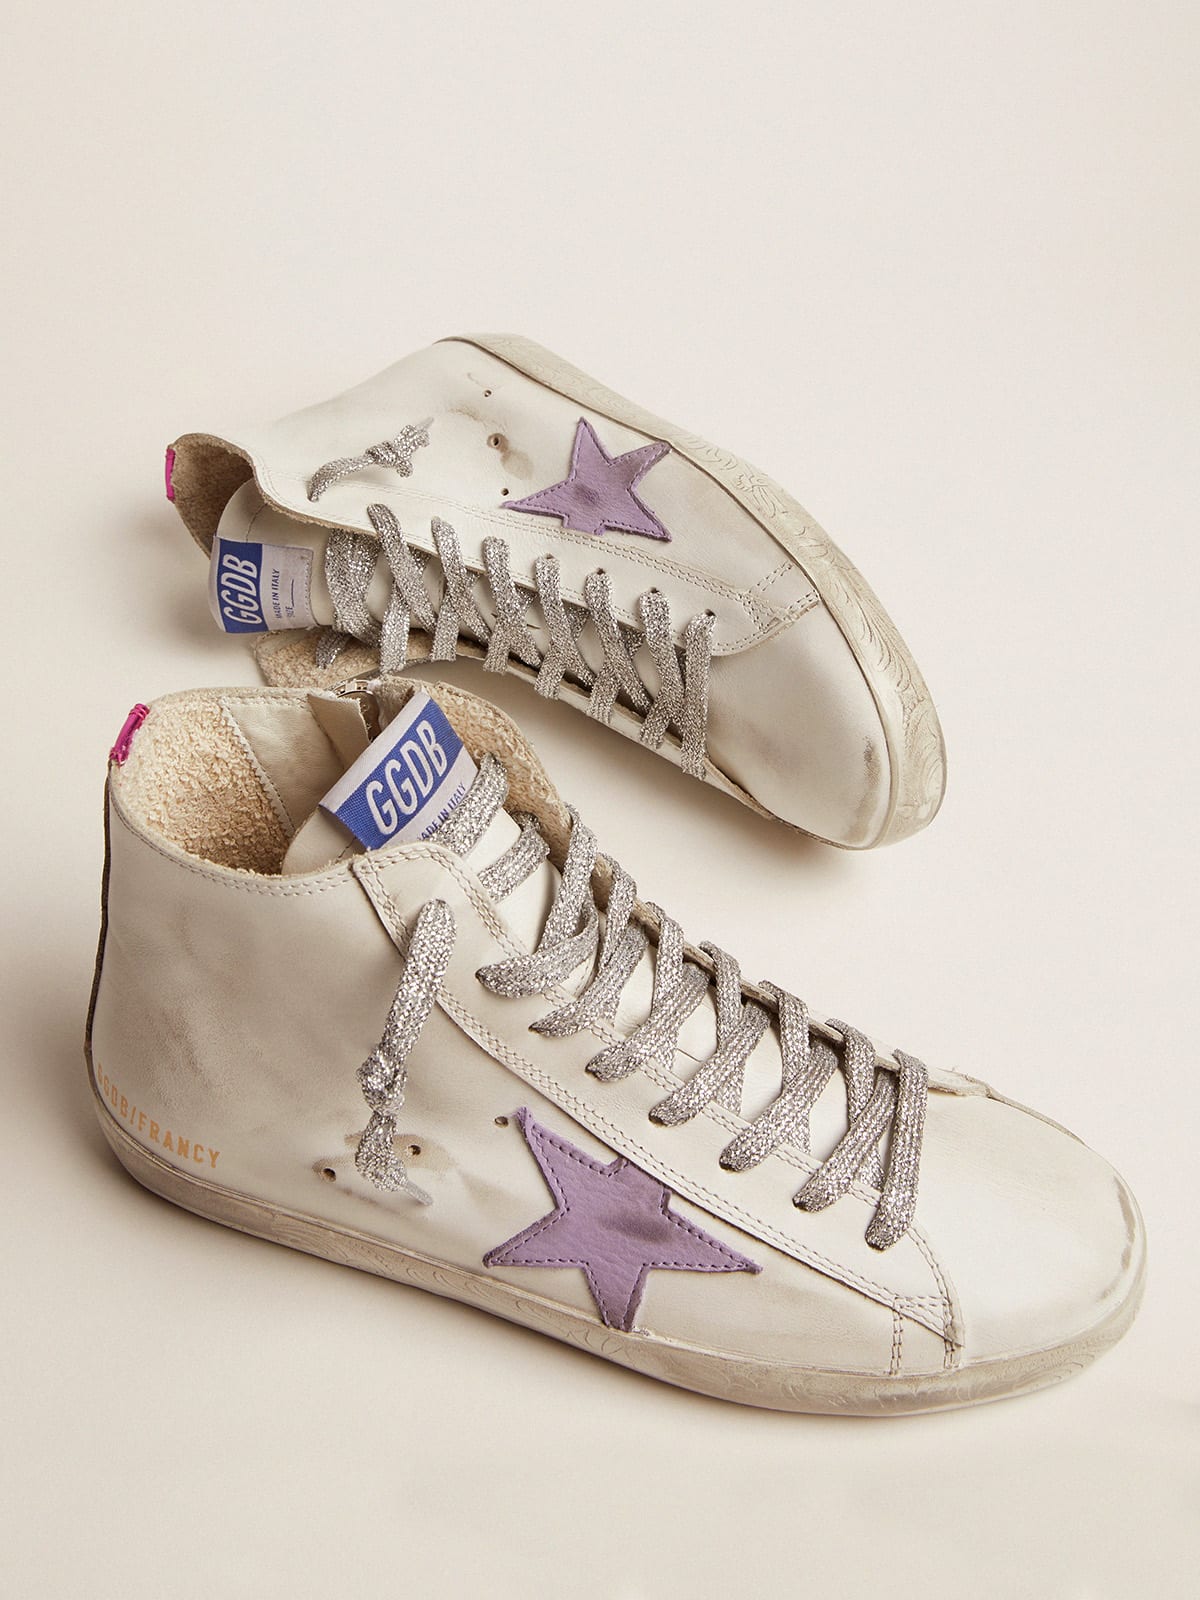 Francy sneakers with foxing with floral decorations and lavender-colored  star | Golden Goose